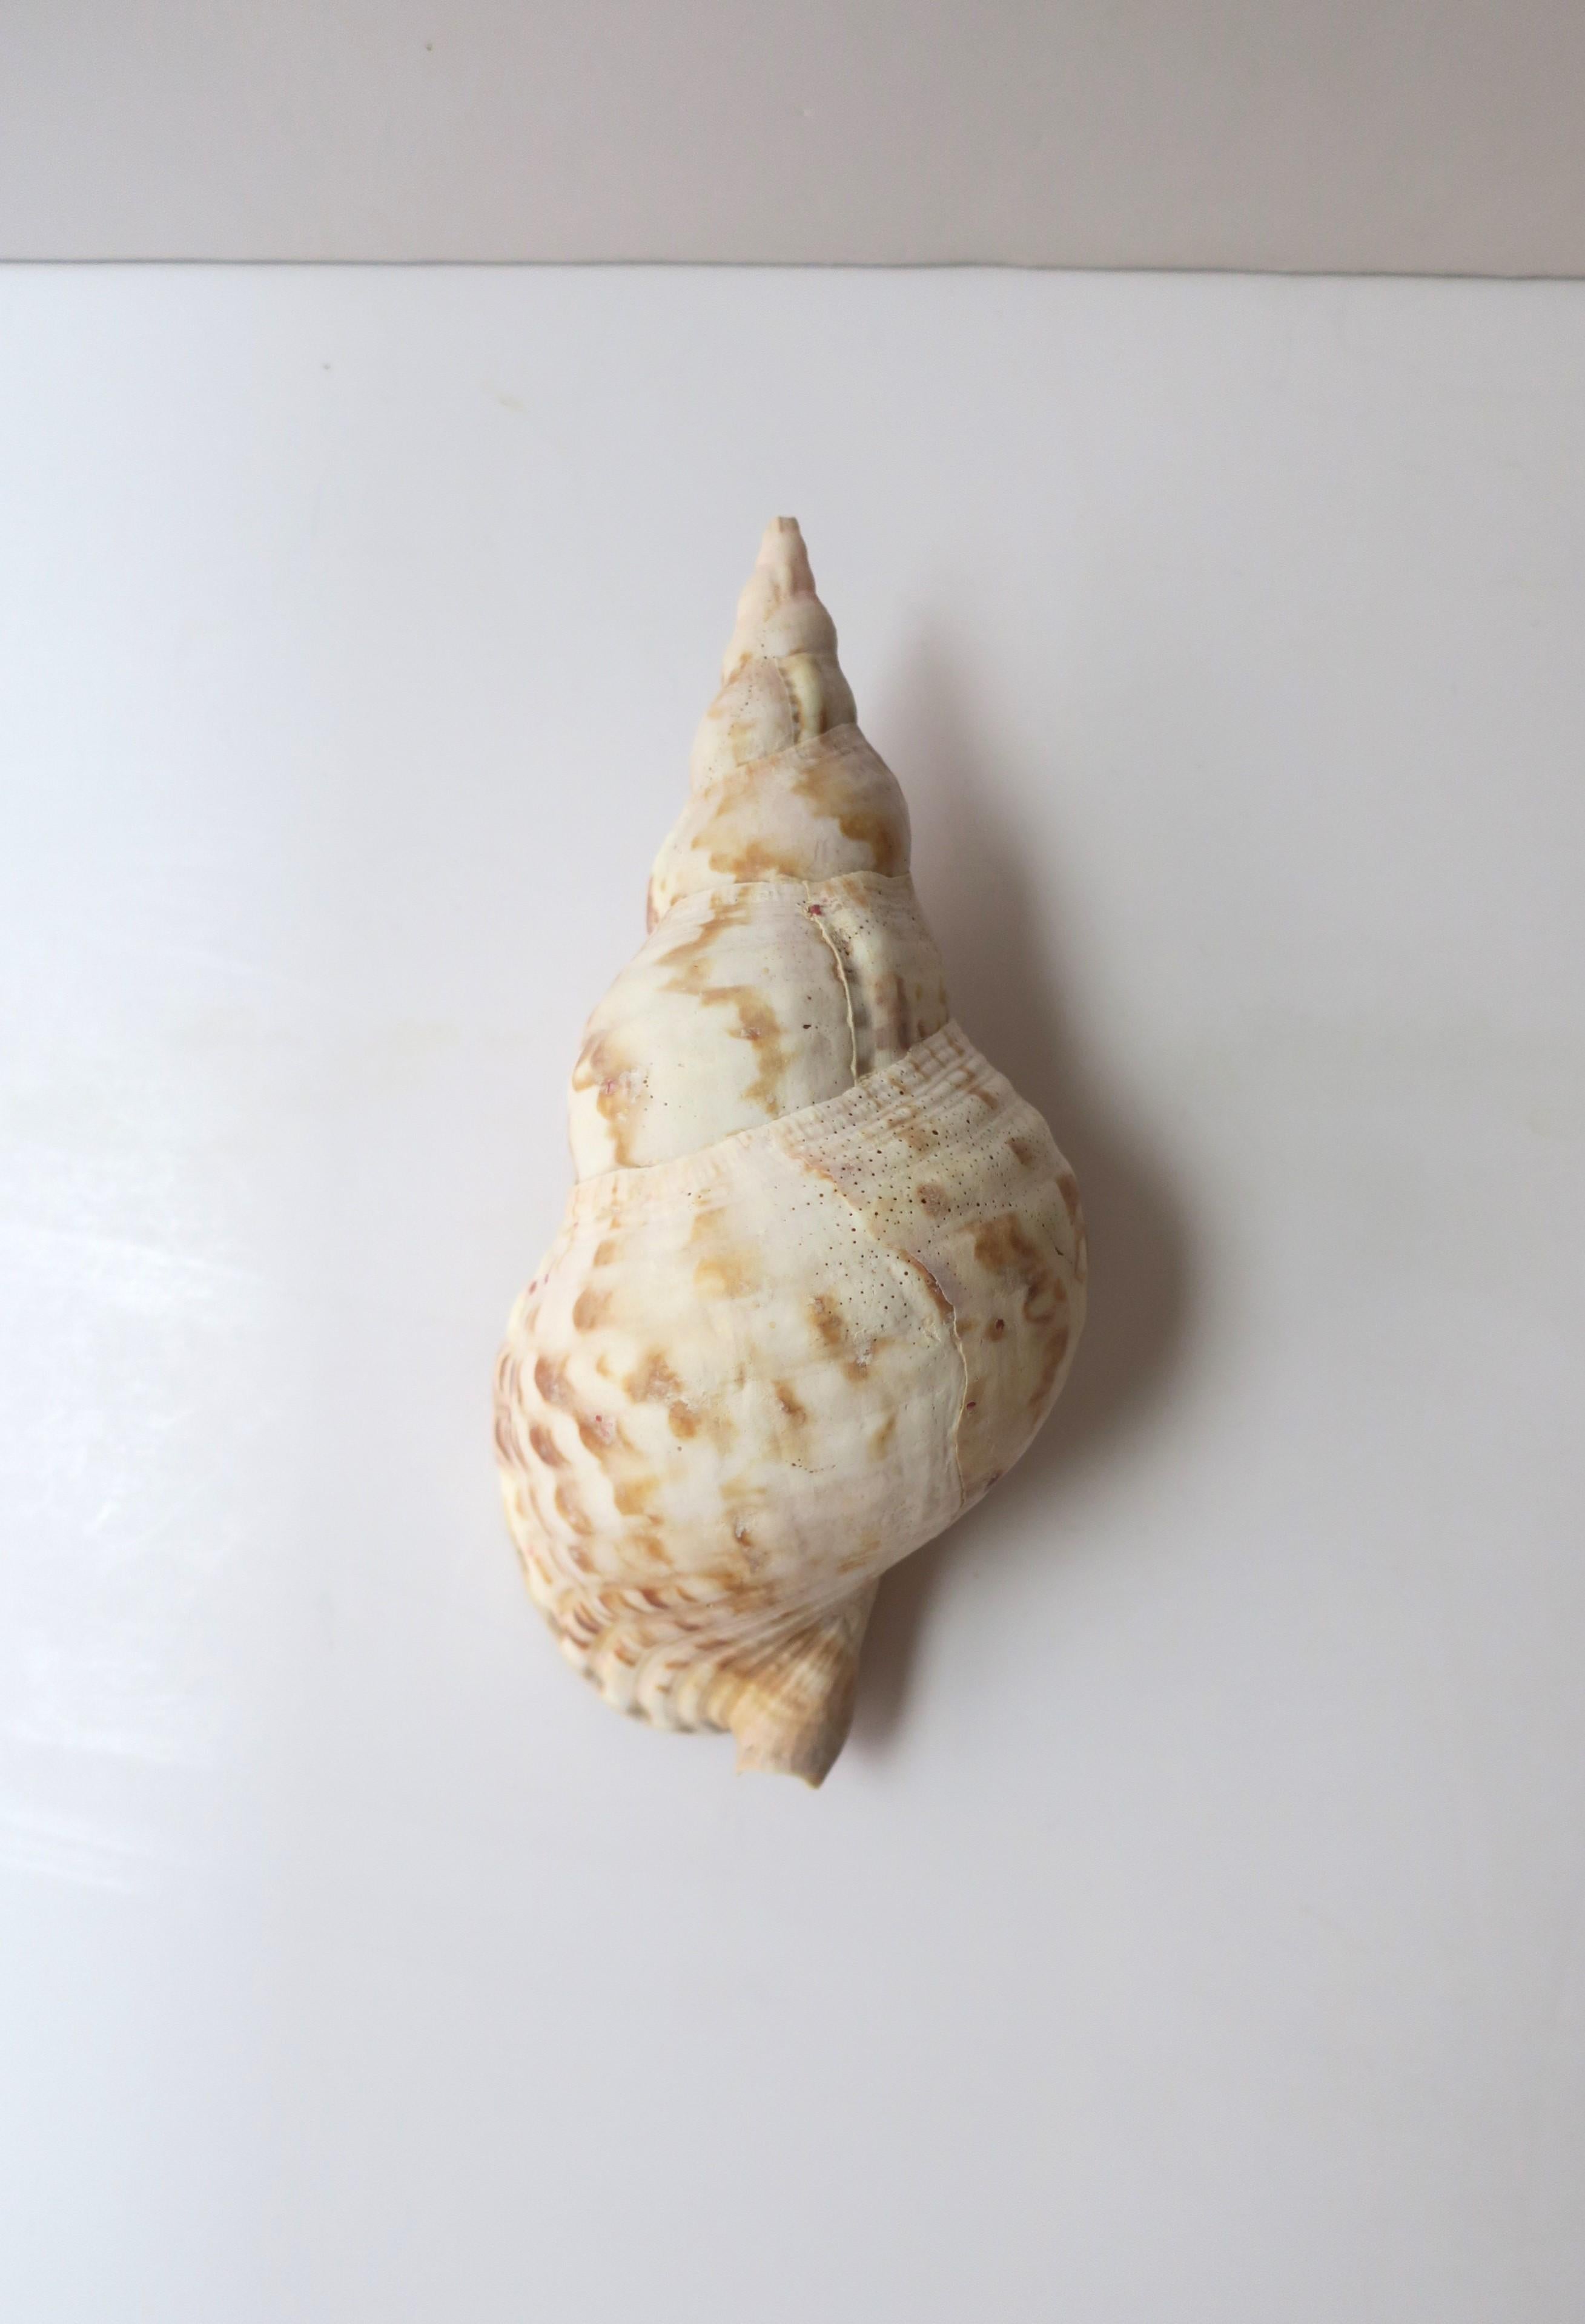 A beautiful natural seashell from the sea, circa ealry-20th century or earlier. Shell appears to be what's call a 'great rapa chank', which can be found off the cost of Sri Lanka. A beautiful natural decorative object as demonstrated. Neutral hues.